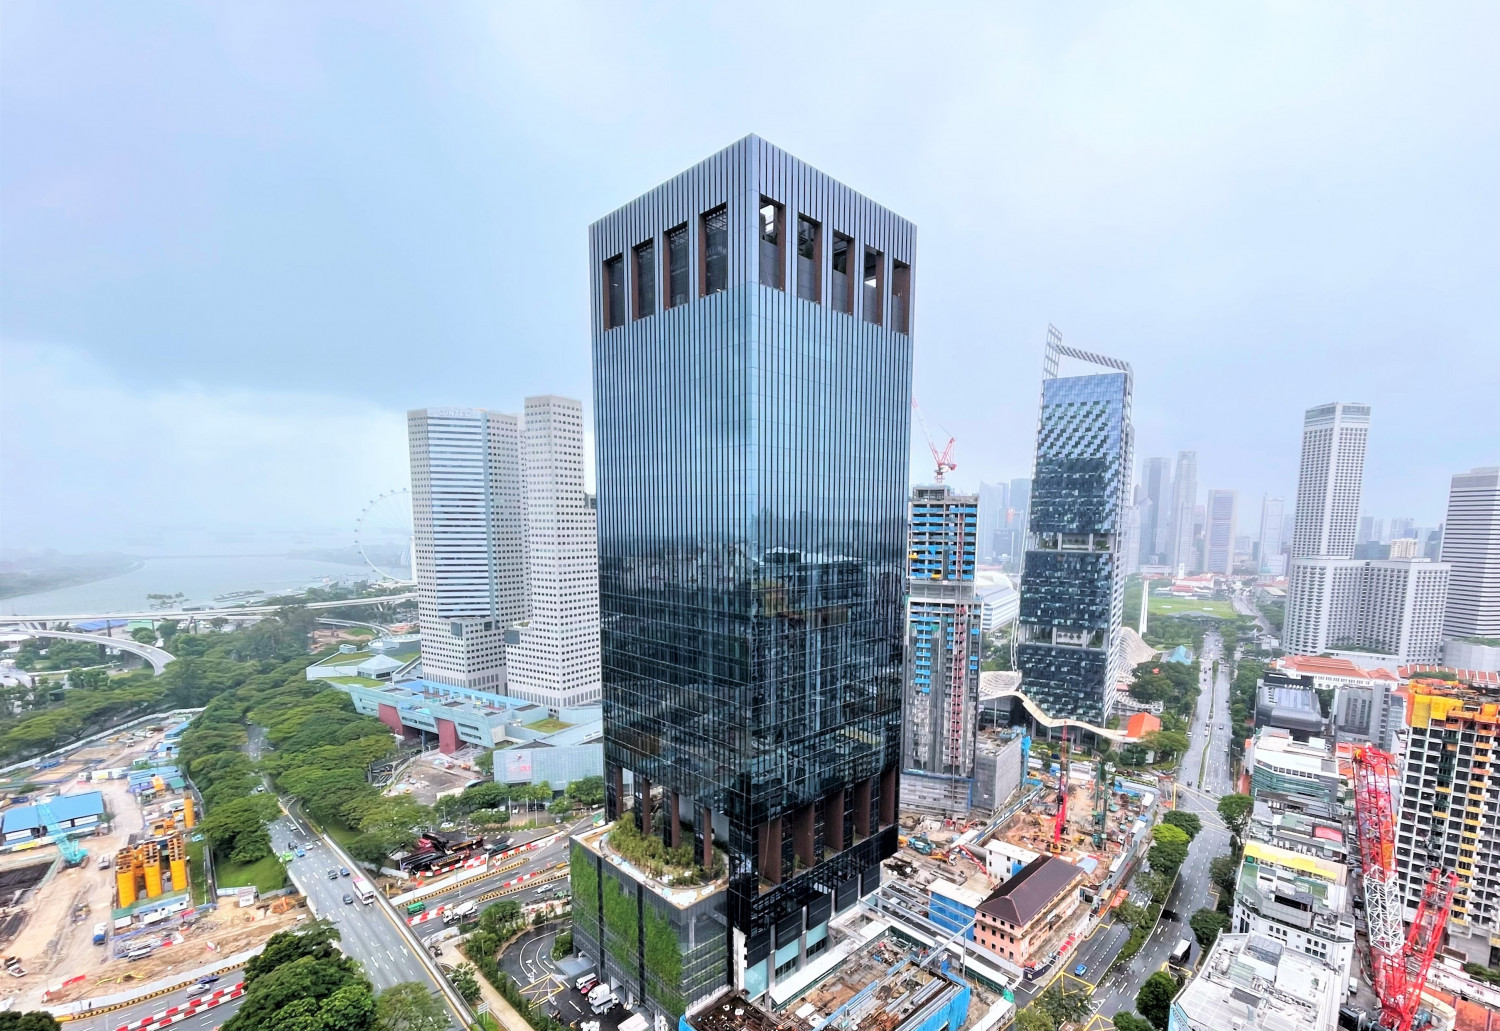 Guoco Midtown’s office tower obtains TOP, achieves 80% take-up rate - Property News